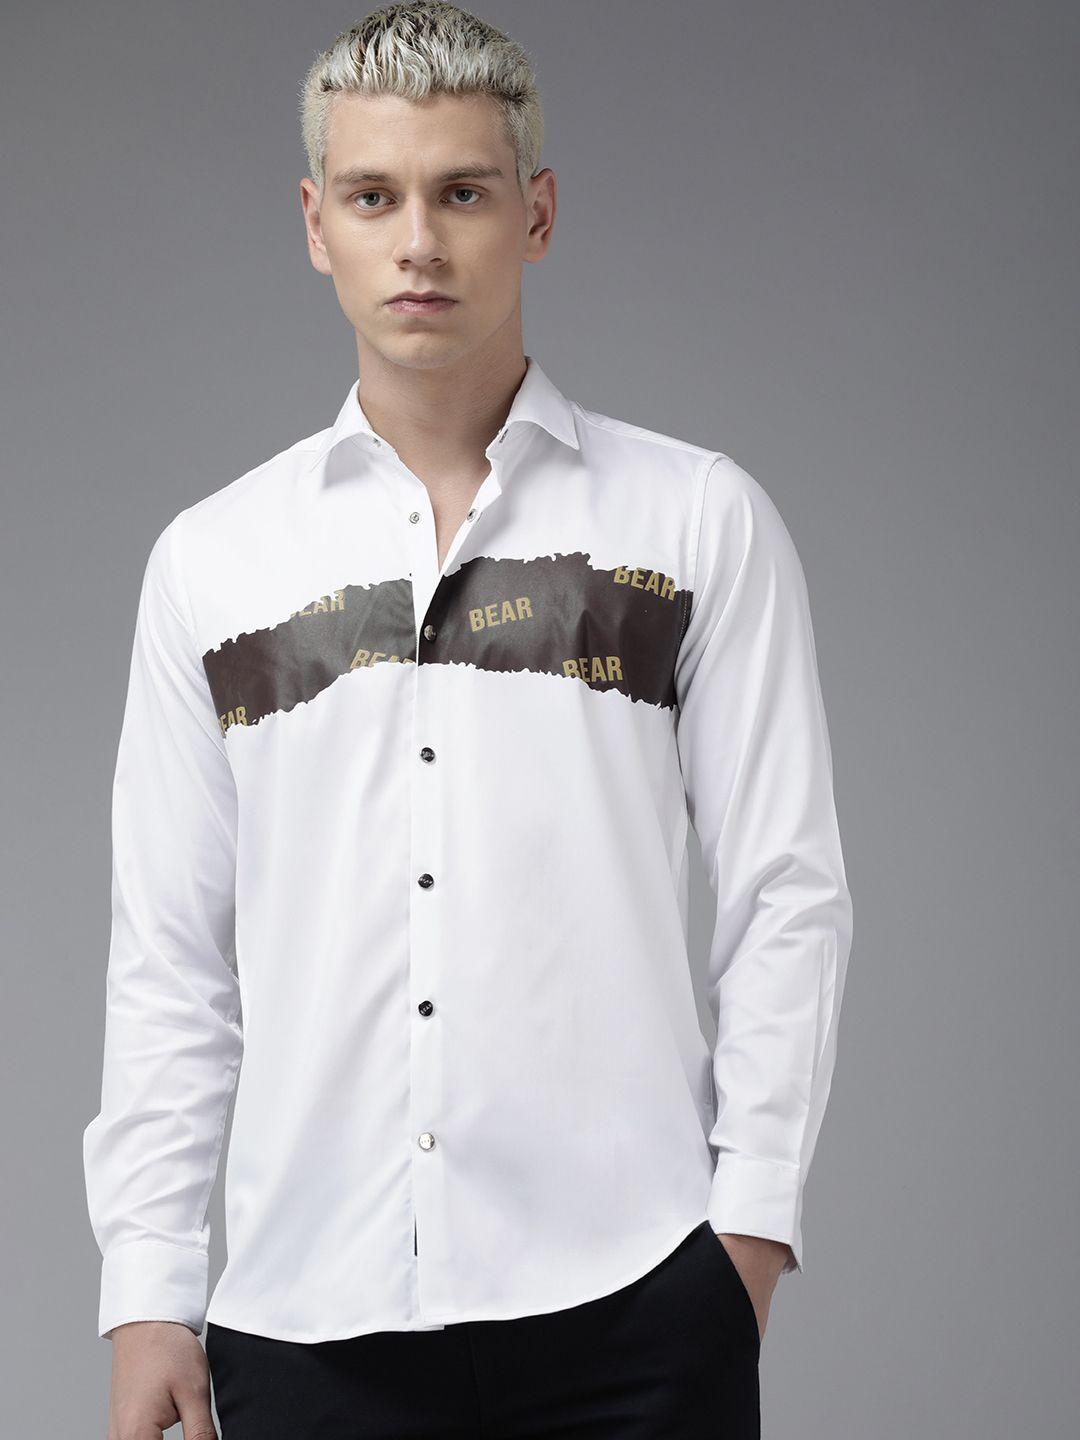 the-bear-house-slim-fit-printed-casual-shirt